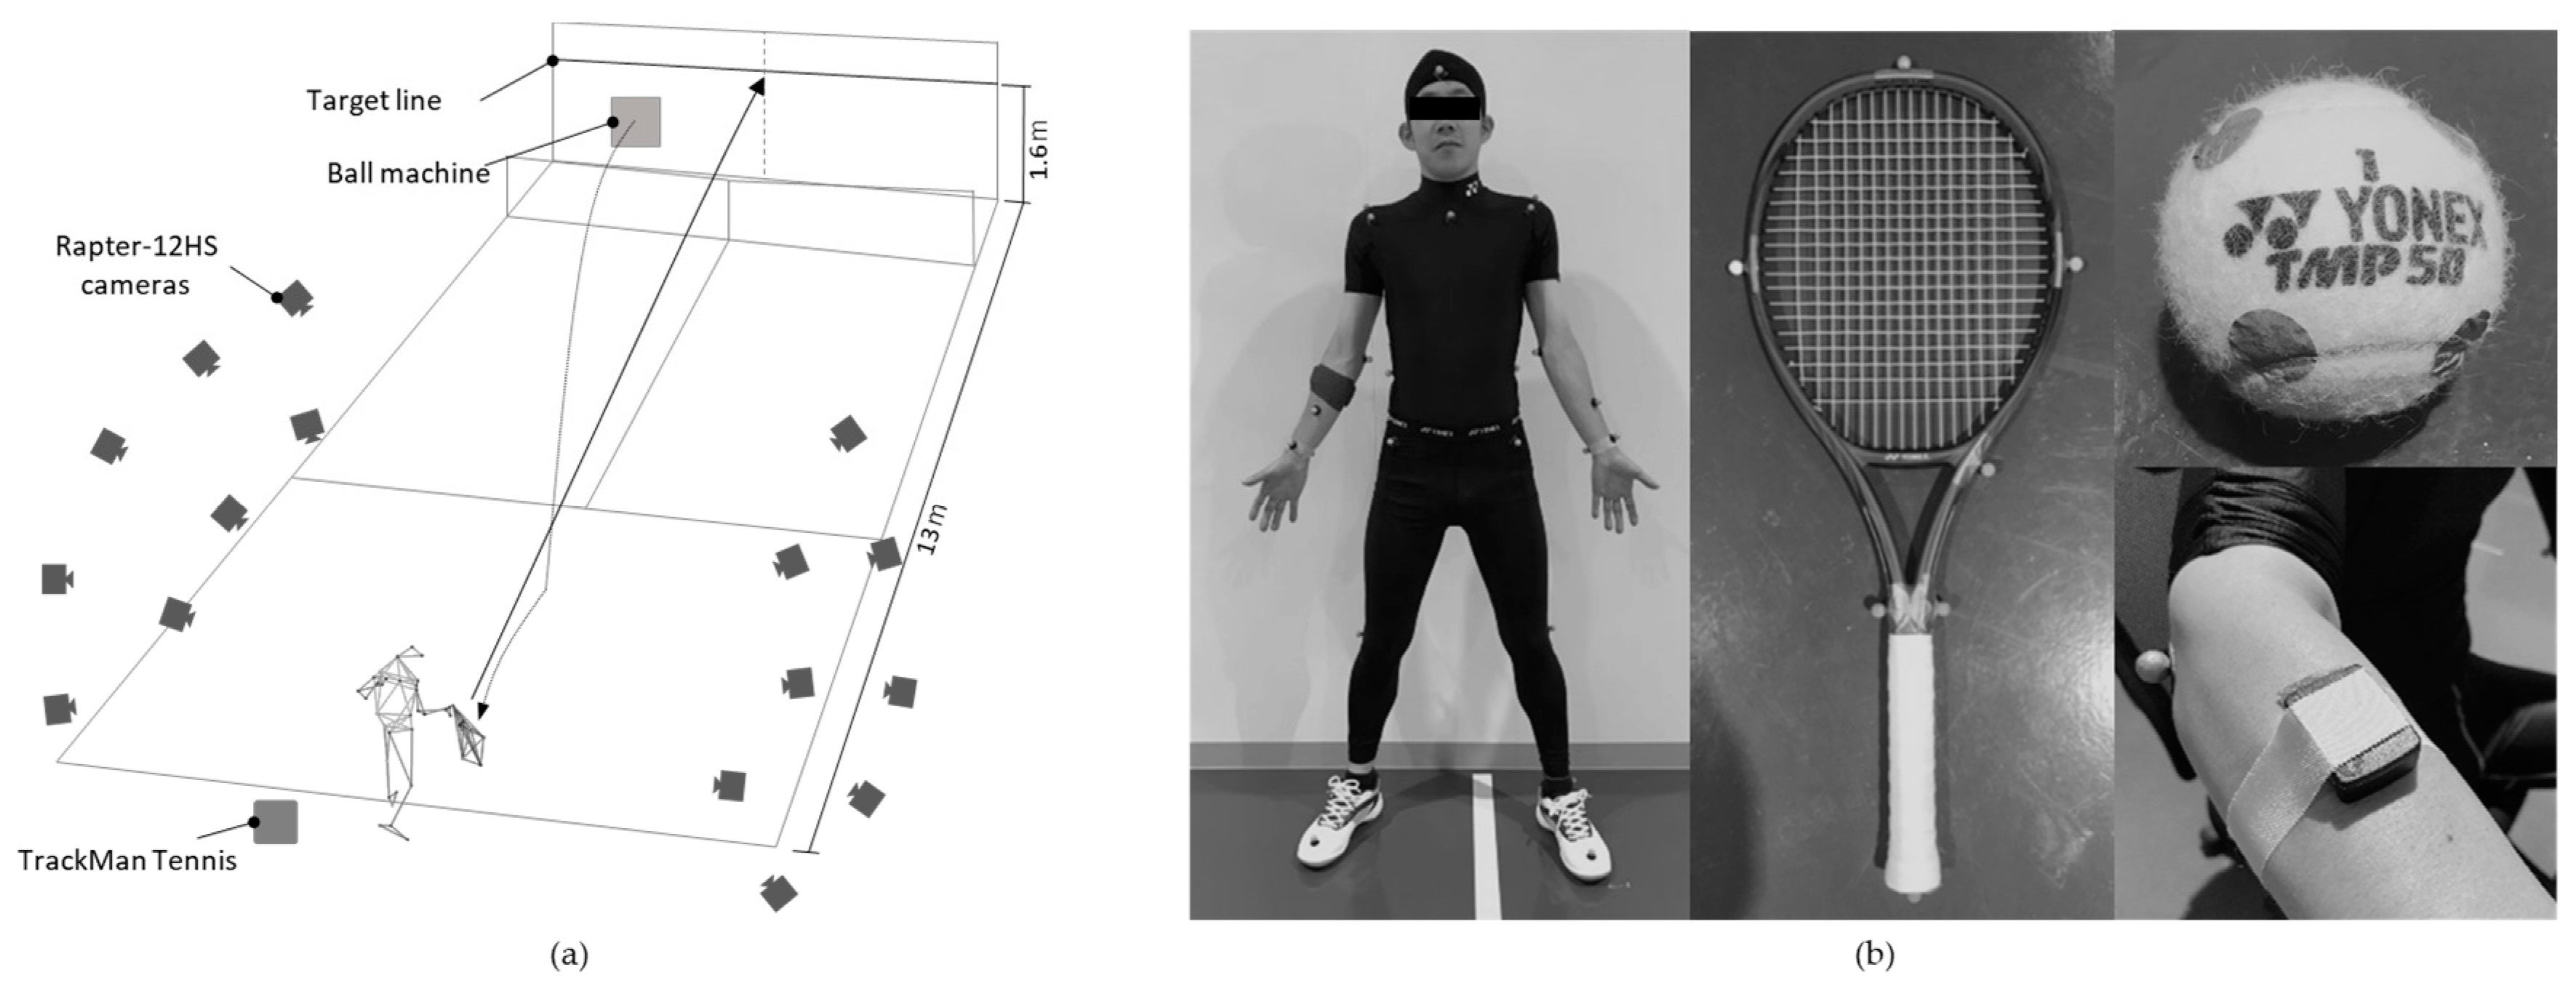 Proceedings | Free Full-Text | Influence of Ball Impact Location on Racquet  Kinematics, Forearm Muscle Activation and Shot Accuracy during the Forehand  Groundstrokes in Tennis